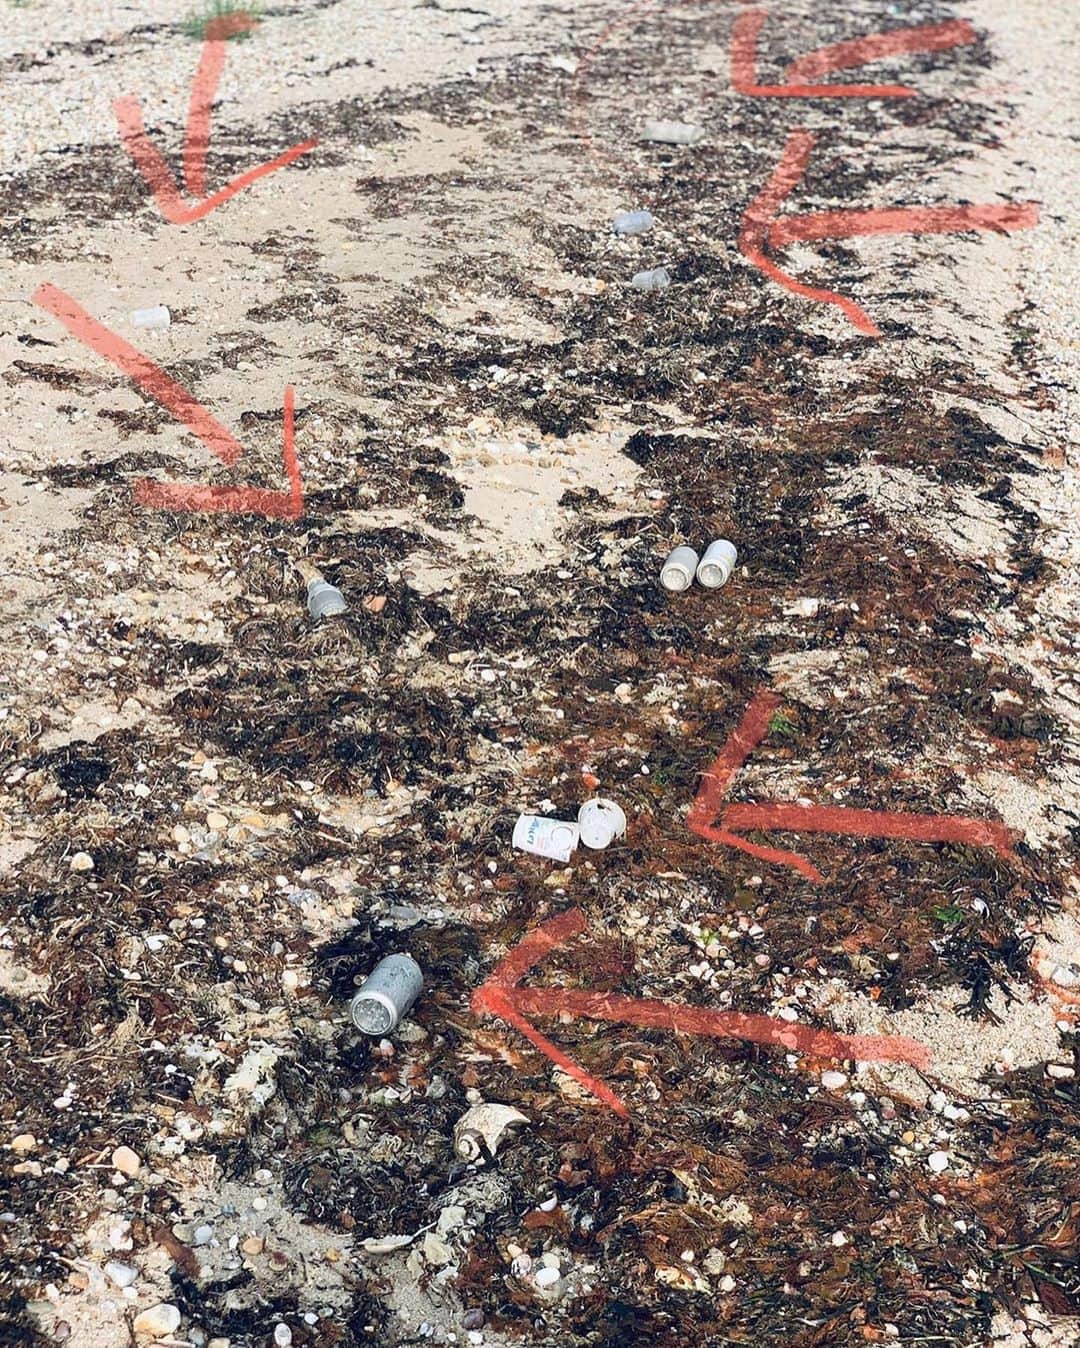 Araksさんのインスタグラム写真 - (AraksInstagram)「Thank you @bridgetmoynahan for joining us and using your platform to make a difference and inspire people.⁠⠀ ⁠⠀ RG @bridgetmoynahan #bounty of a different kind.  It breaks my heart seeing trash on a beach so I always try to do my part and help clean up. This time I am also doing it to support my friend araks_yeramyan and her #arakssummercleanup.  Hoping you all will help too #anywheretrash #pickitup. ⁠⠀ ⁠⠀ You can take part in this challenge from wherever you are, by picking up litter on your next run / walk / ride / whatever.⁠⠀⁠⠀ ⁠⠀⁠⠀ Enter to win a swimsuit of your choice from our Recycled Swim Collection by doing the ⁠⠀⁠⠀ following:⁠⠀⁠⠀ ⁠⠀⁠⠀ 1. Follow @araksofficial⁠⠀⁠⠀ 2. Post photos of your cleanup and tag @araksofficial⁠⠀⁠⠀ 3. Use #AraksSummerCleanup⁠⠀⁠⠀ ⁠⠀⁠⠀ Each post receives one entry and entries are unlimited, so the more posts you make the more entries you get. ⁠⠀⁠⠀ ⁠⠀⁠⠀ On August 1st, one winner will be randomly selected. ⁠⠀⁠⠀ ⁠⠀⁠⠀ I believe that each of us can make a difference and that small steps can lead to a big impact. ~ @araks_yeramyan⁠⠀ ⁠」7月23日 23時59分 - araksofficial